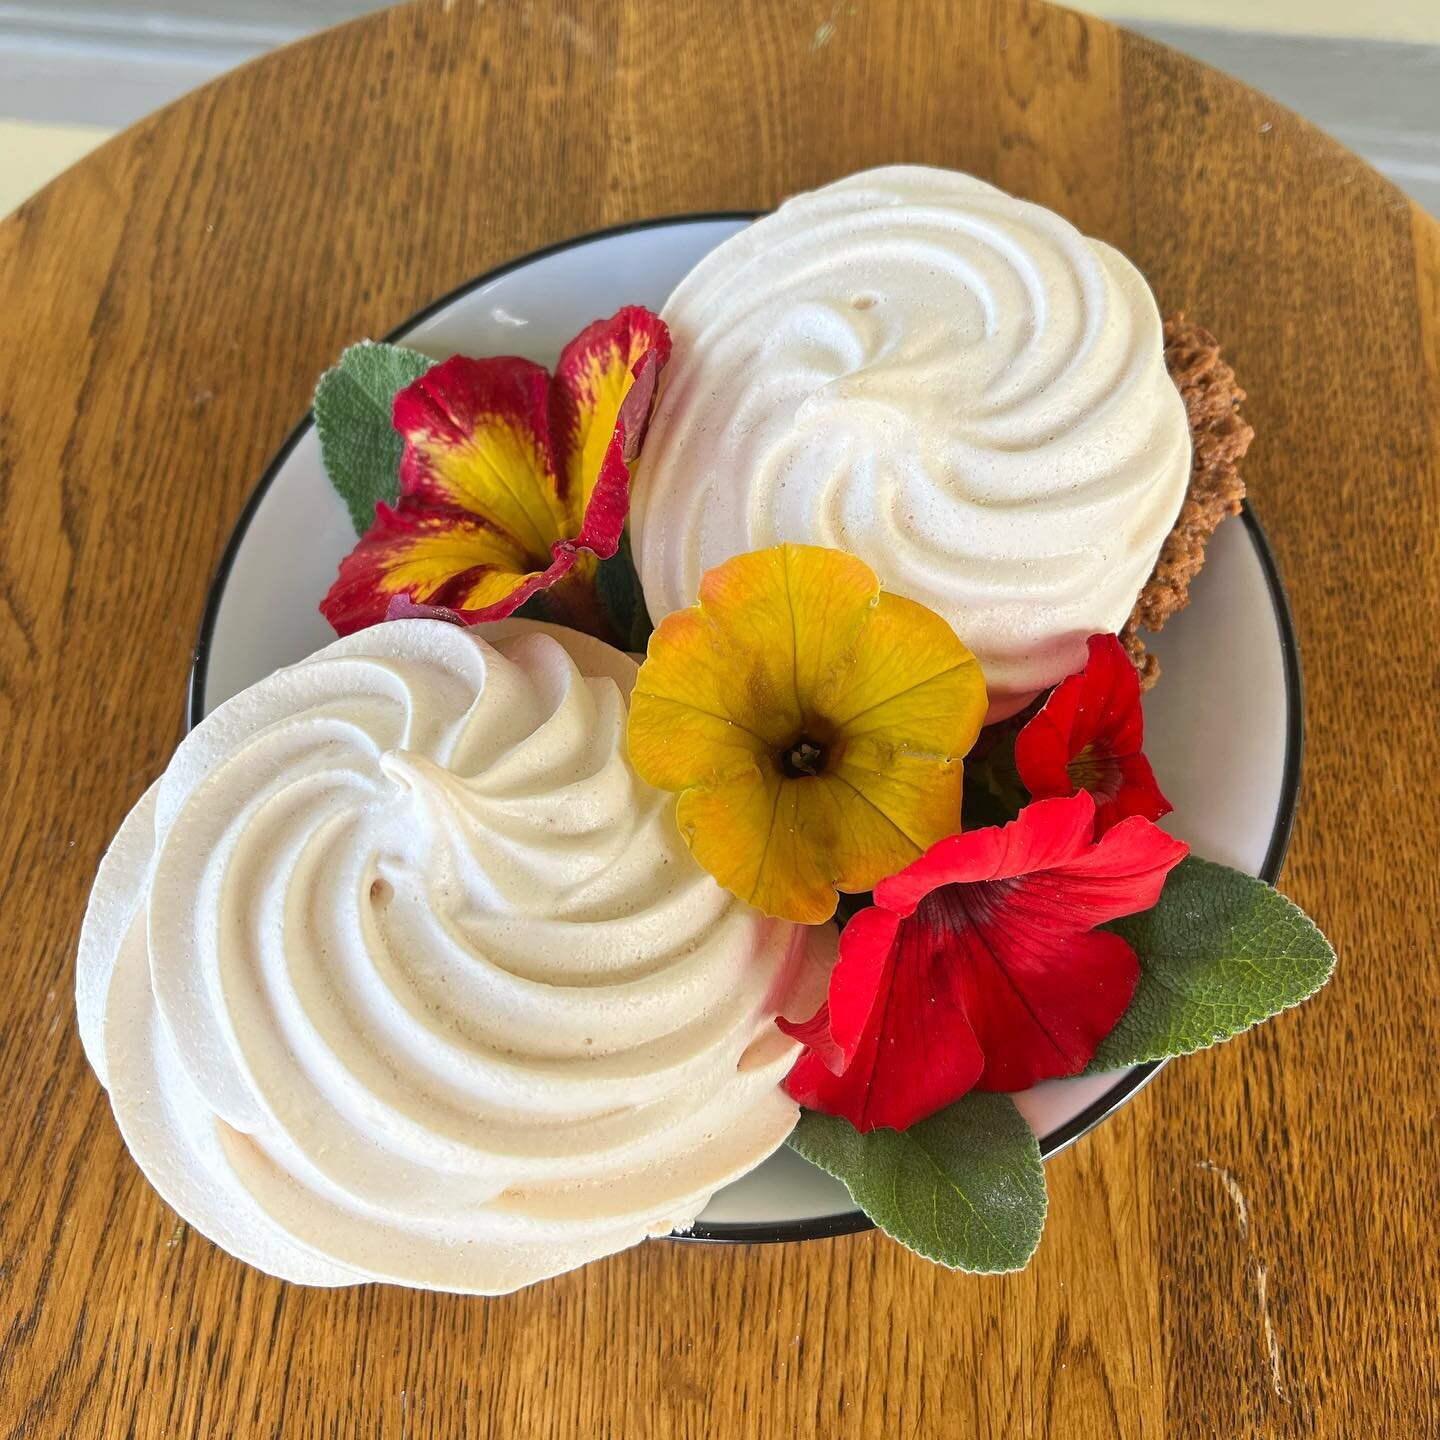 We have some extra sweet treats right now! Our newest creation - meringues! We have regular and deluxe 😋 the deluxe have a biscotti cookie base and the regular are gluten free. #buenaluz #bakery #portangeles